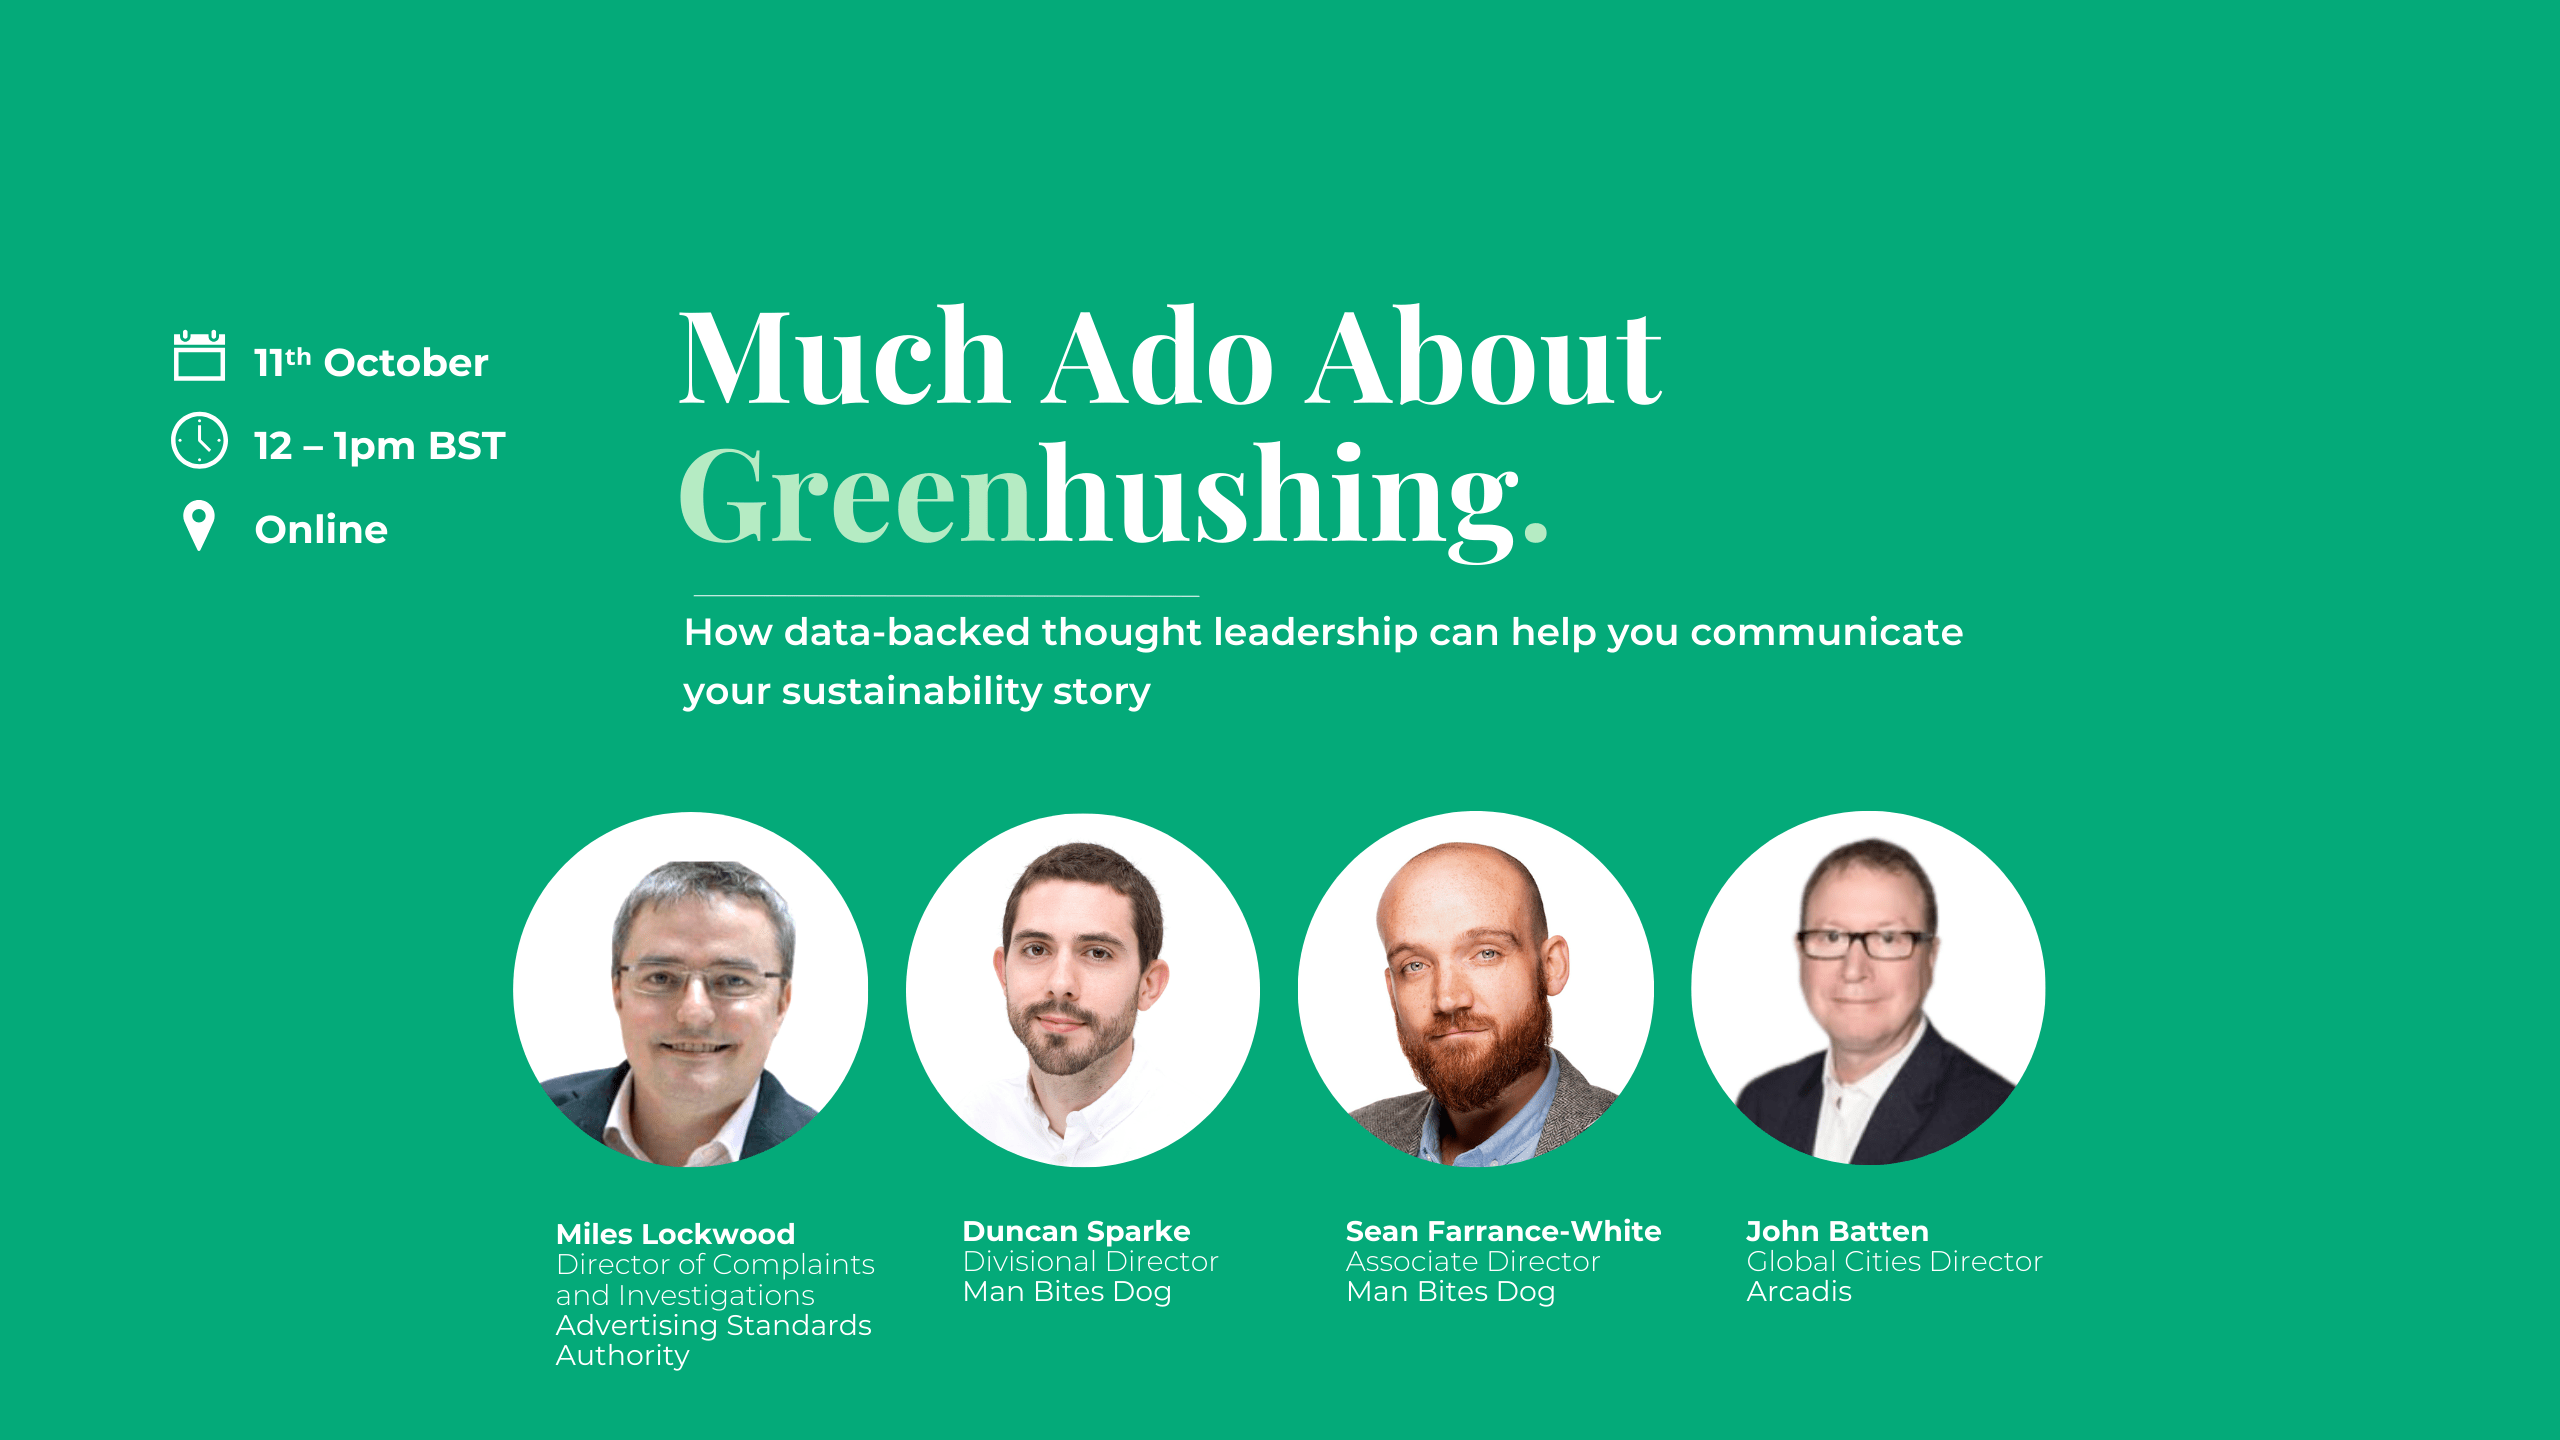 Man Bites Dog is hosting the Much Ado About Green Hushing webinar on October 11